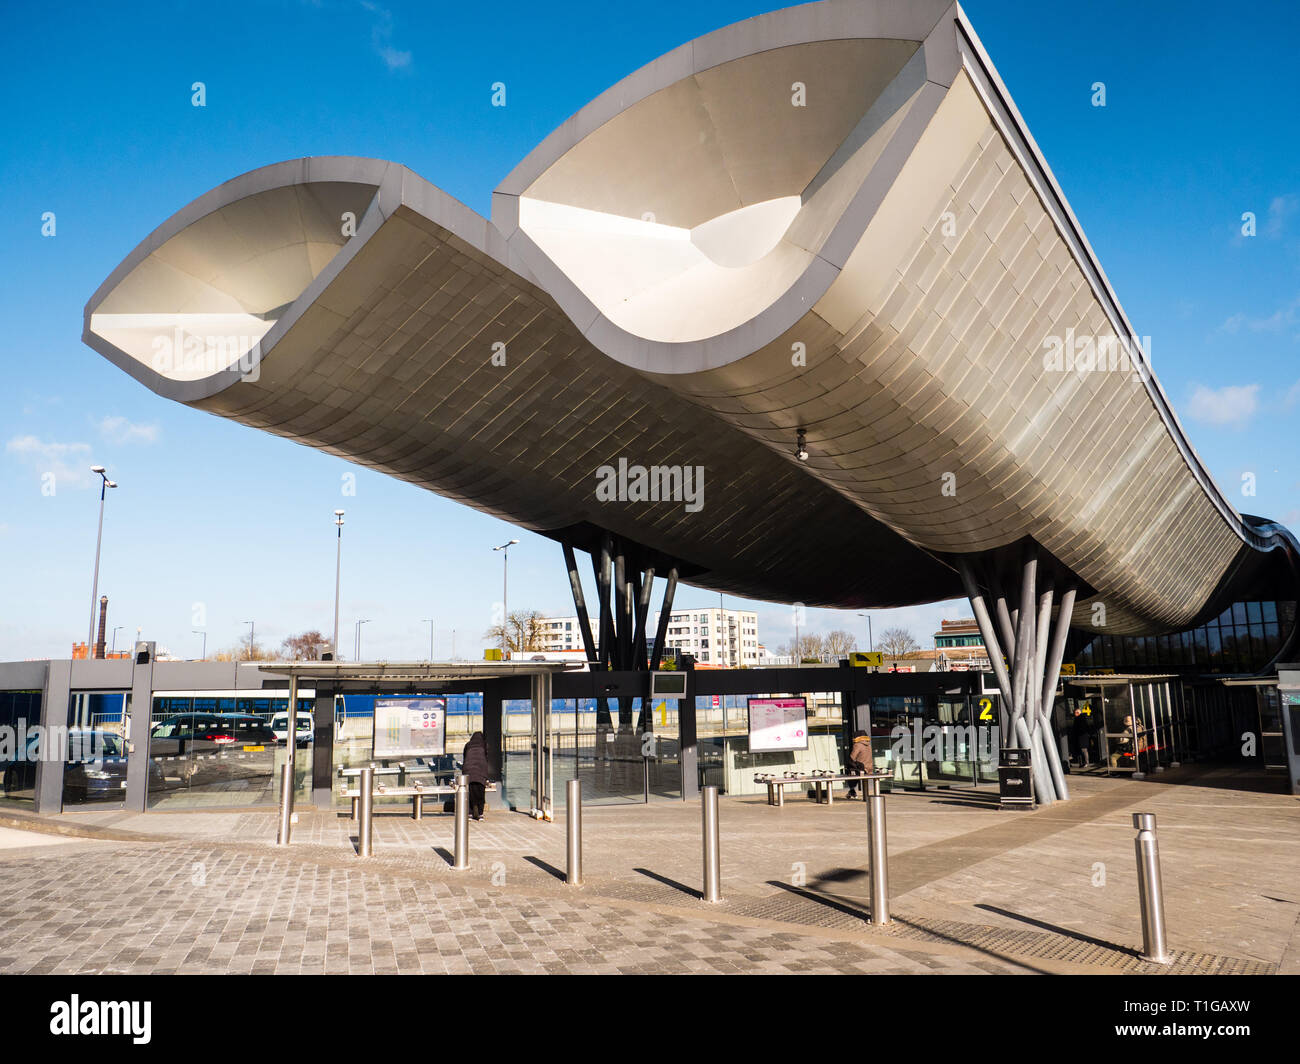 Slough Bus Station, The Heart of Slough Project to Regenerate Slough, Berkshire, England, UK, GB. Stock Photo